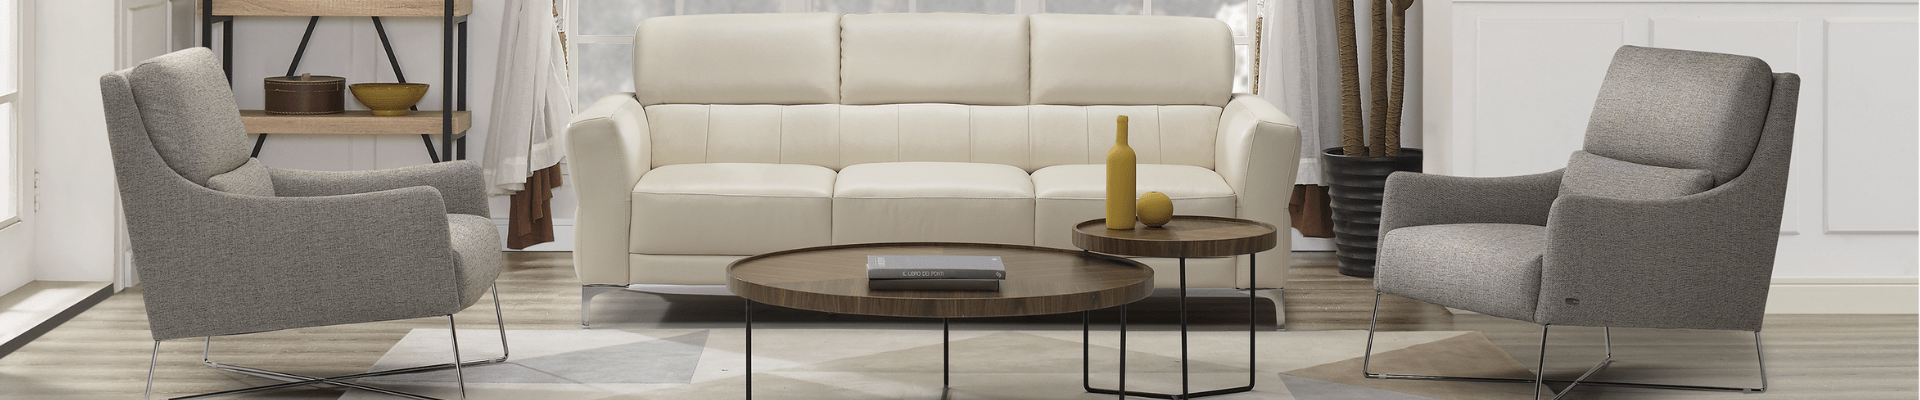 Natuzzi Editions Sofa Collections Banner